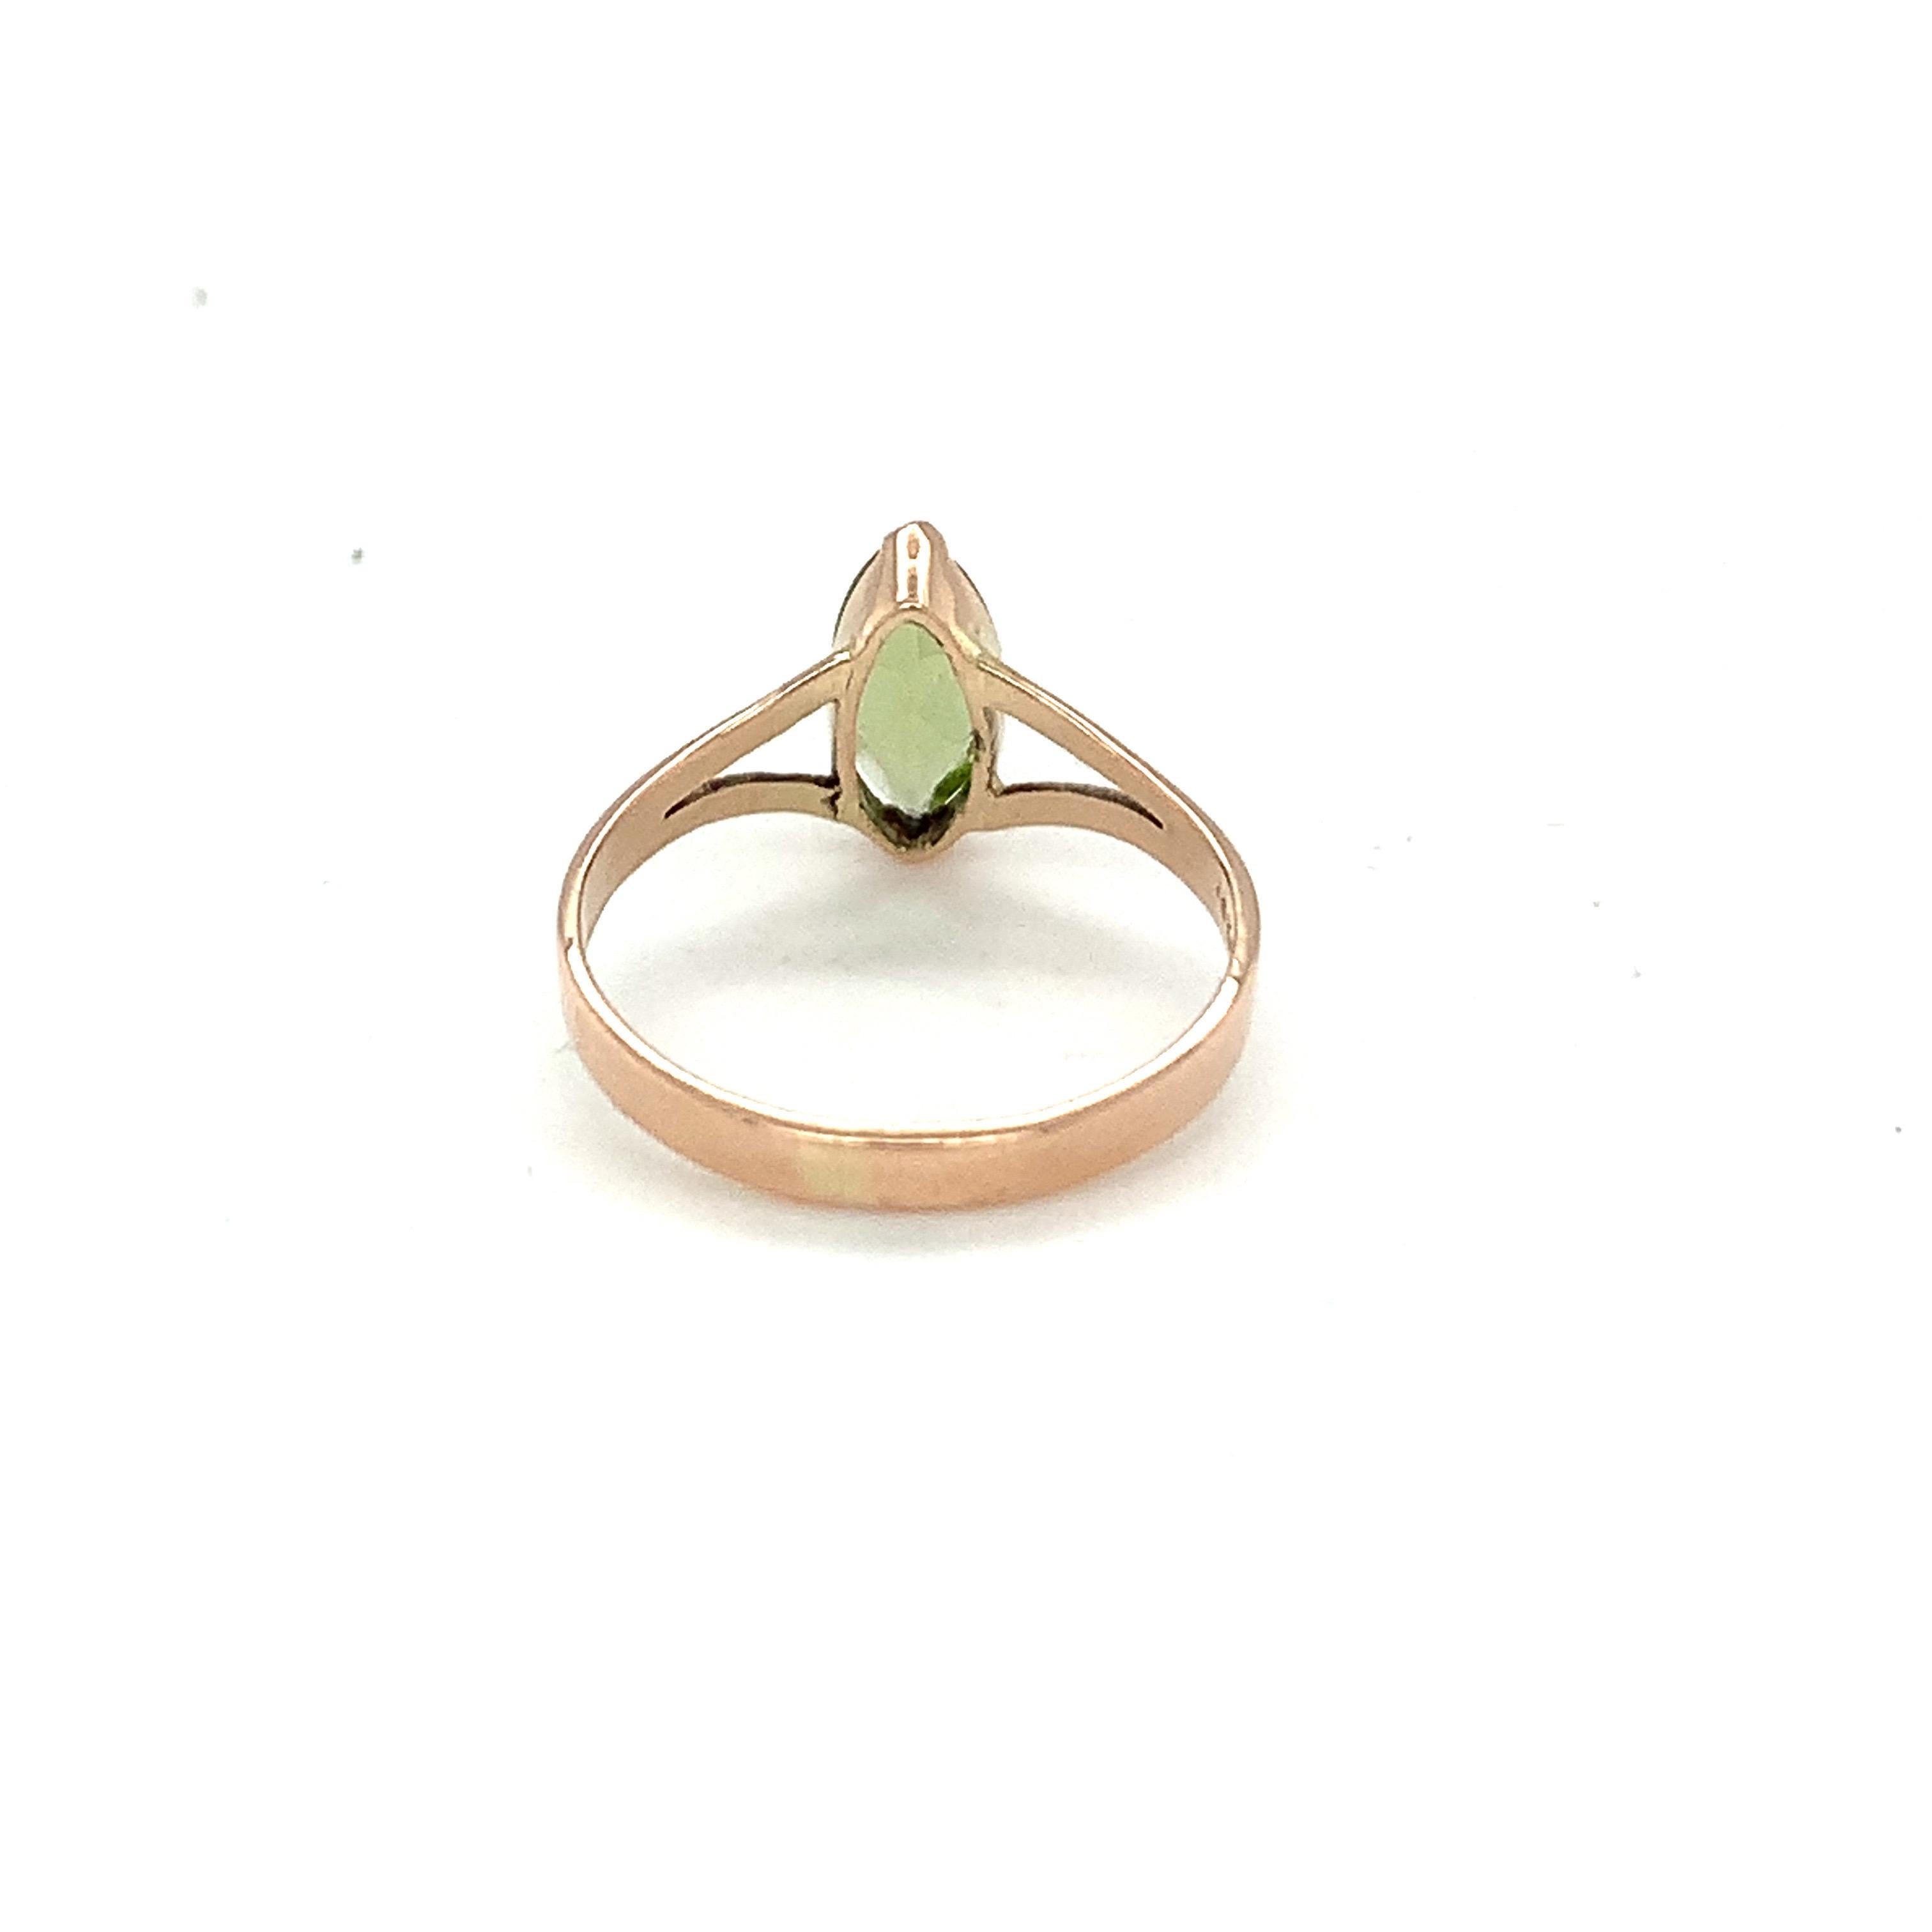 Marquise Cut Peridot Ring Set in 14k Yellow Gold In New Condition For Sale In Trumbull, CT